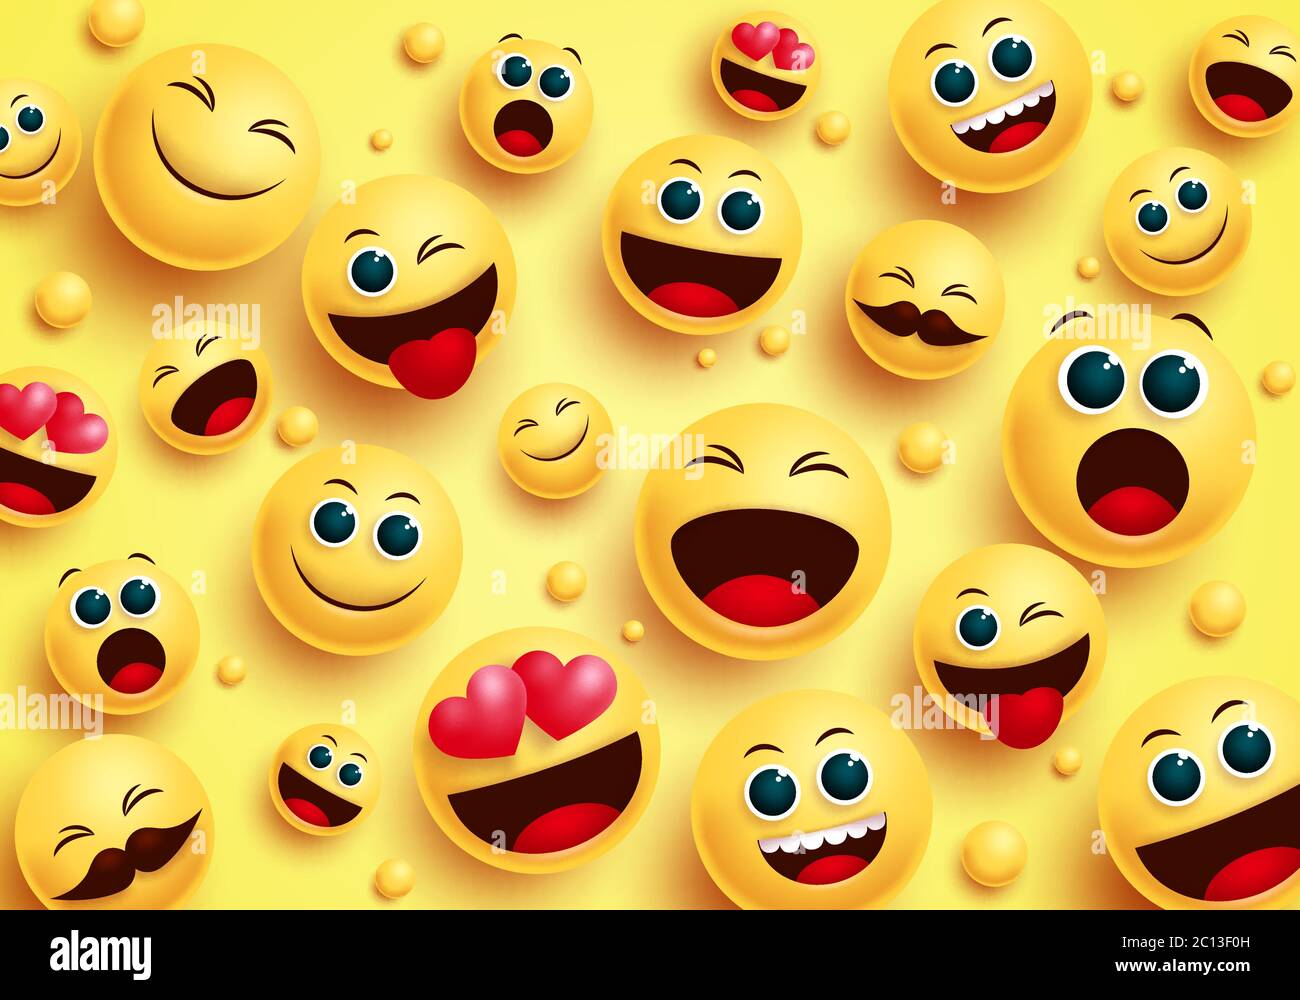 smiley-emojis-in-yellow-background-vector-concept-smileys-emoji-avatar-character-in-top-view-with-different-facial-expressions-like-in-love-happy-2C13F0H.jpg